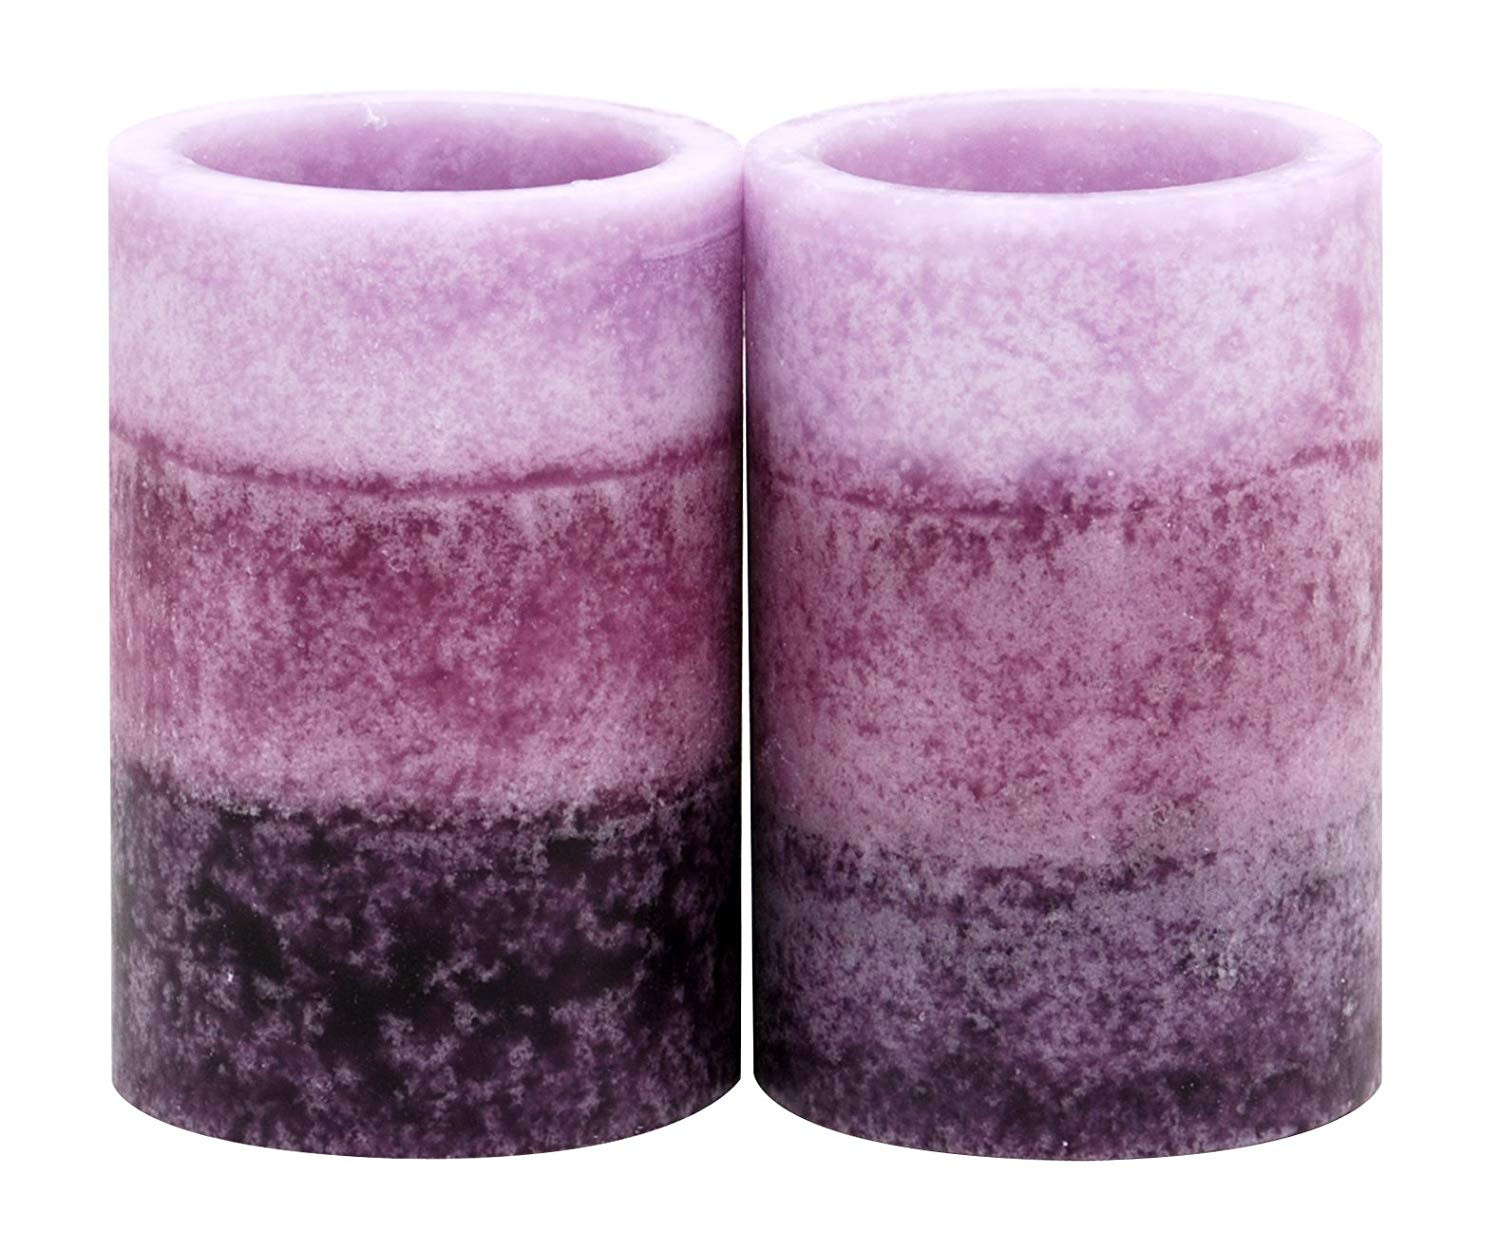 28 Trendy 20 Inch Cylinder Vases 2024 free download 20 inch cylinder vases of amazon com kiera grace 2 by 3 inch tri layer led pillar candles with regard to amazon com kiera grace 2 by 3 inch tri layer led pillar candles mini lavender cashmer